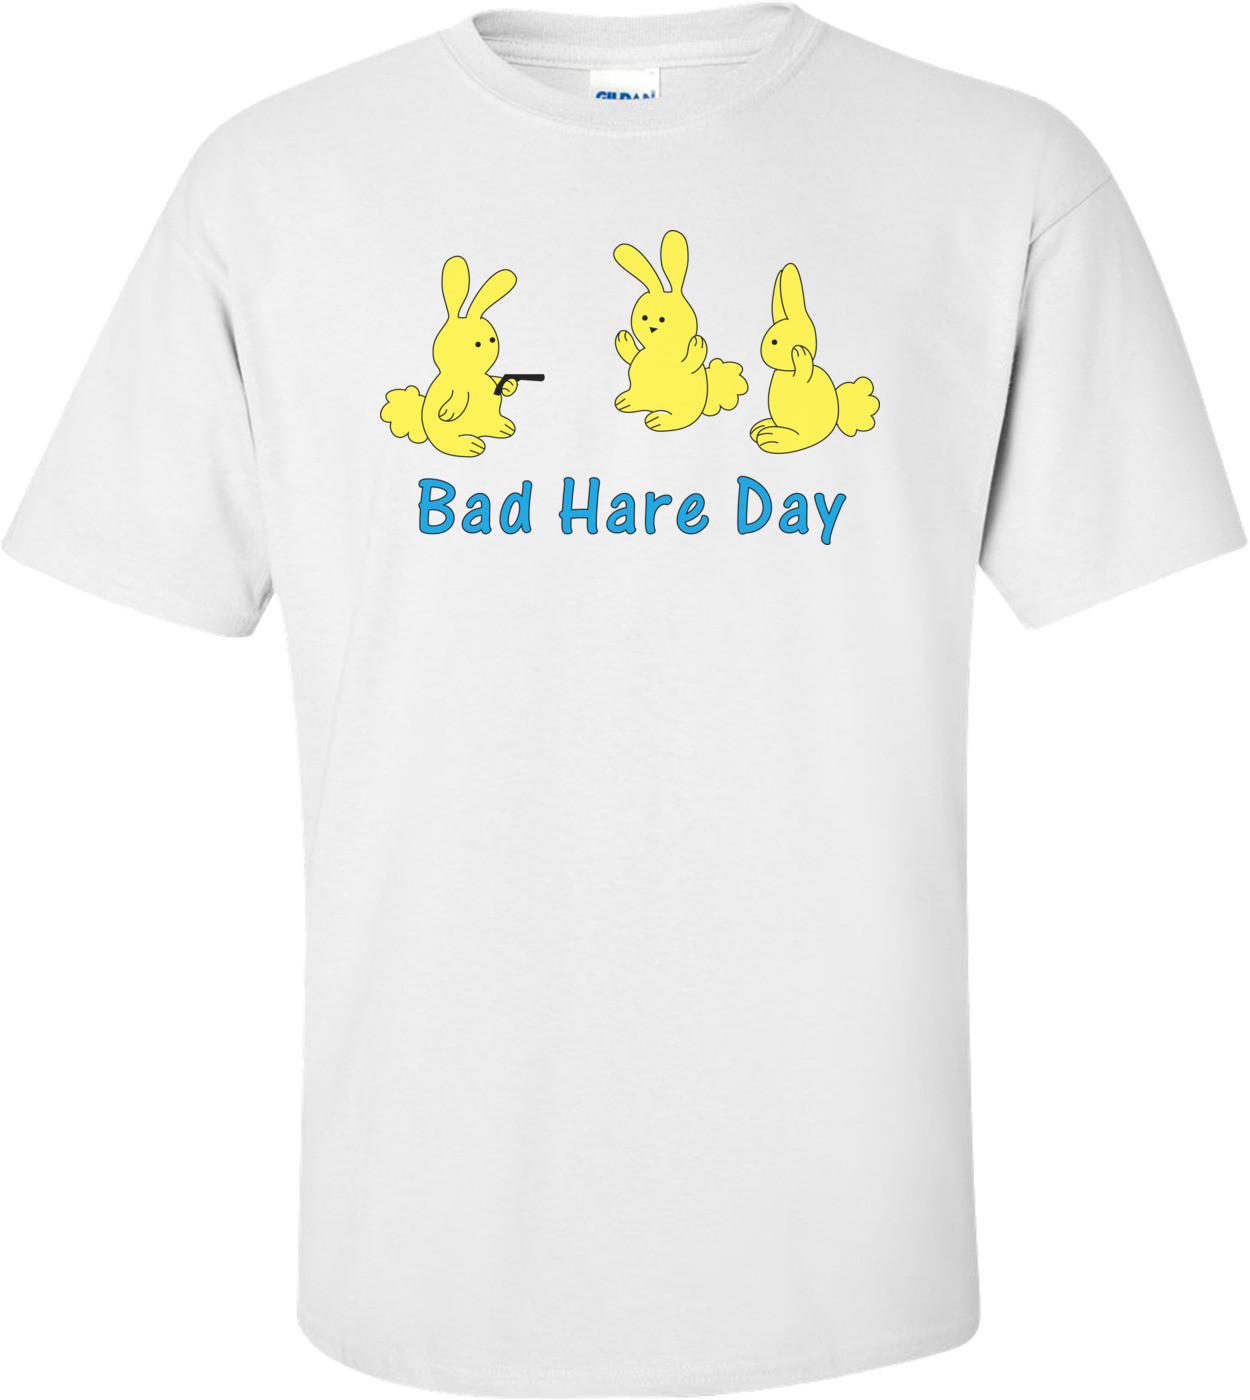 Bad Hare Day Funny